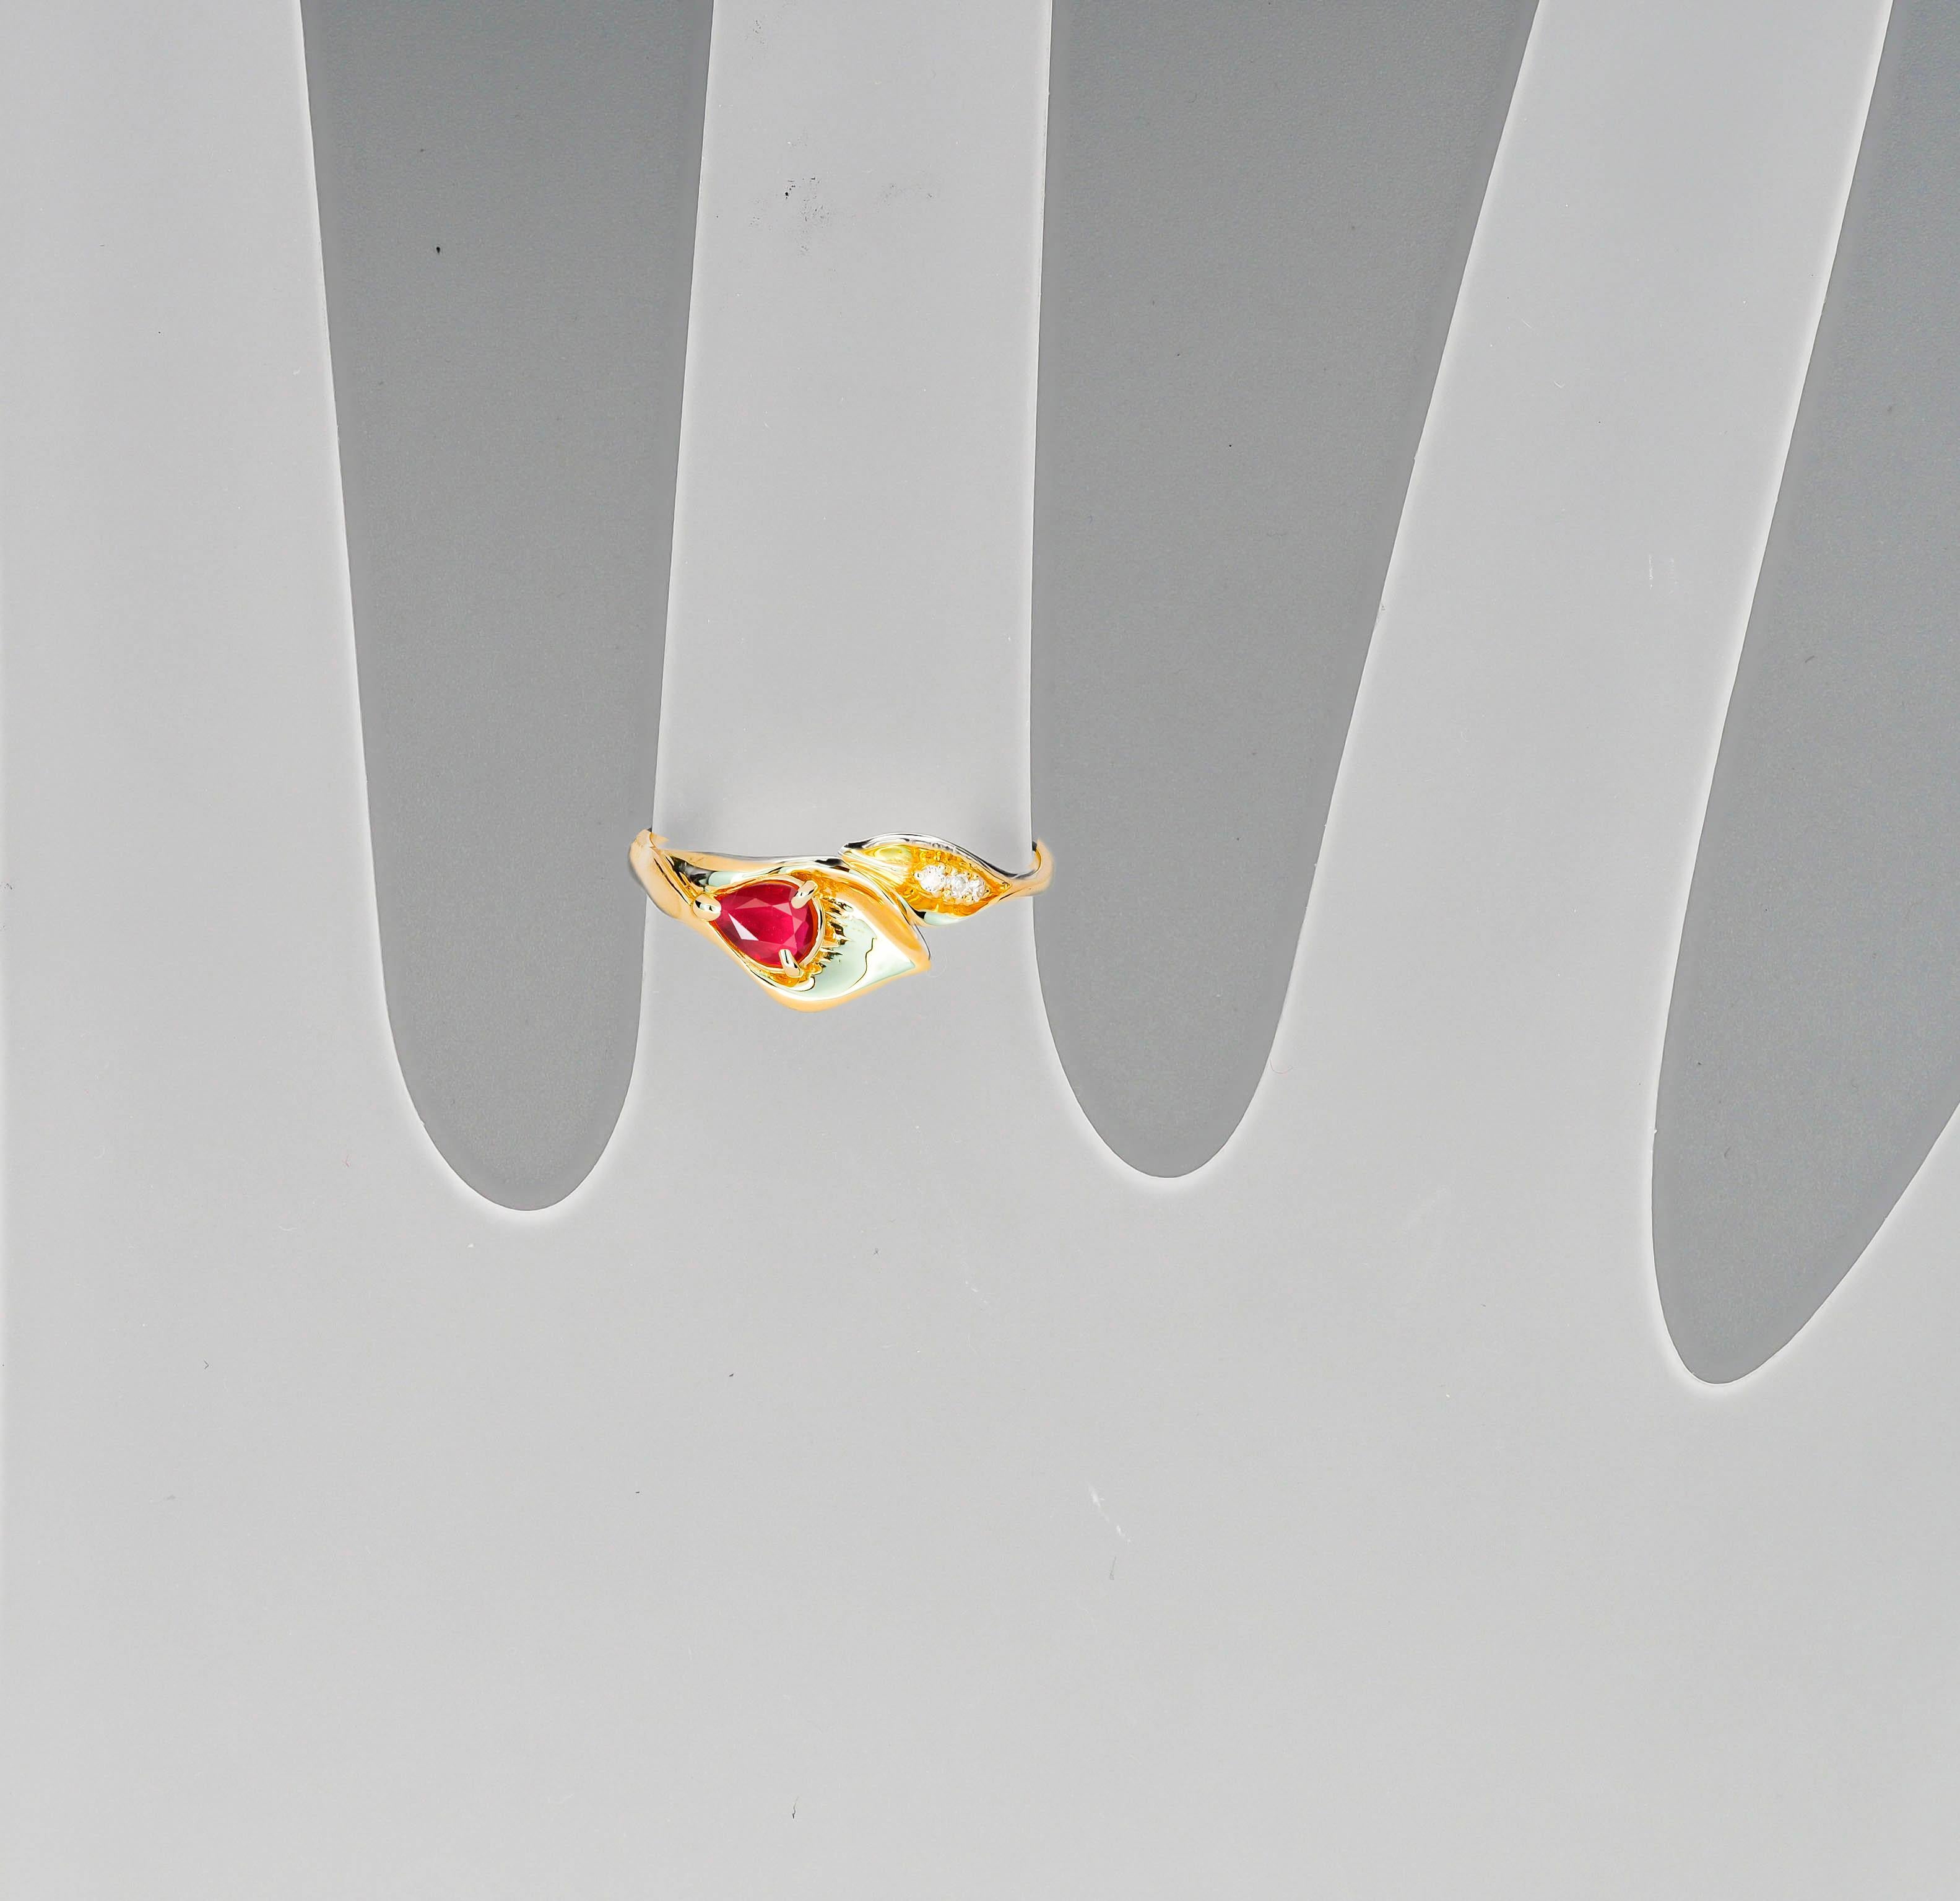 For Sale:  Lily Calla Gold Ring, 14 Karat Gold Ring with Ruby and Diamonds! 10